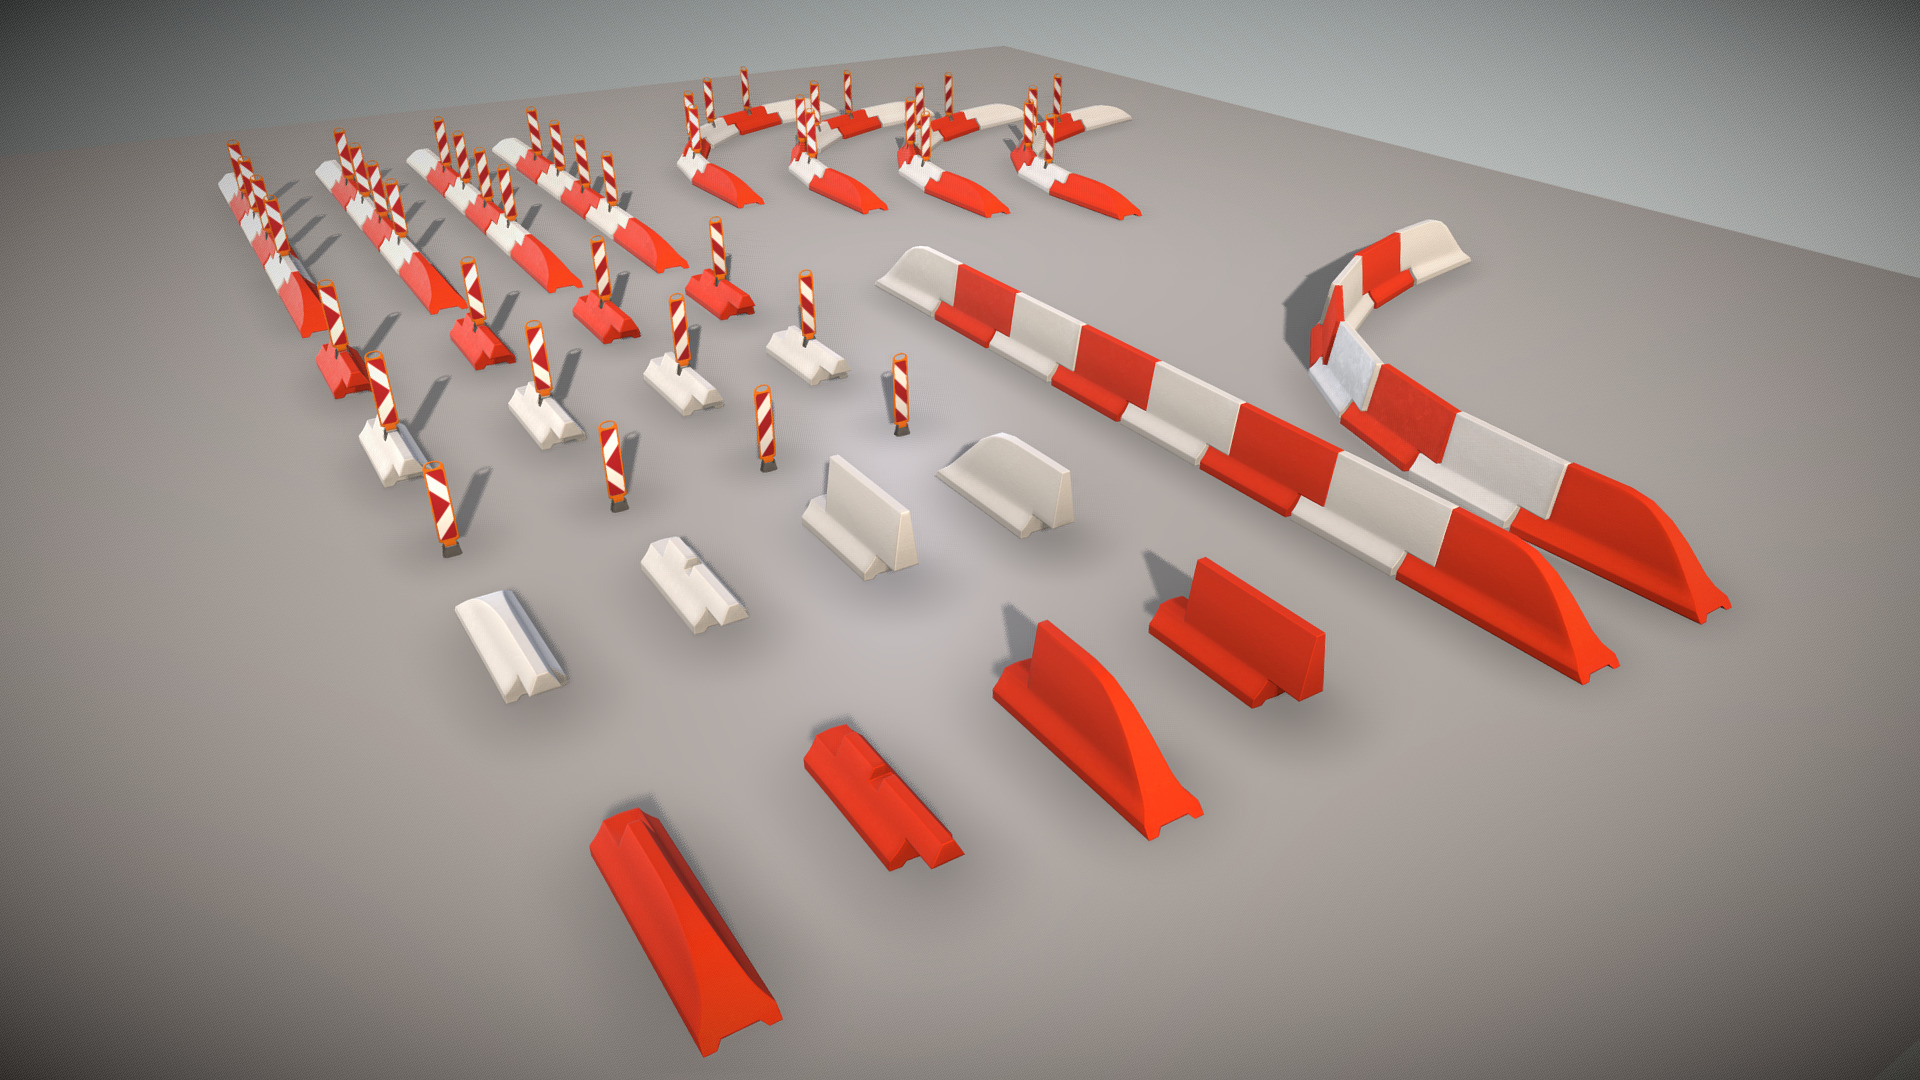 A collection of 30 components for white and red road traffic barriers.



Eine Sammlung von 30 Komponenten für weiß rote Leitbord Straßensperren.



Textures(4k):




Color-map

Ambient-occlusion-map

Normal-map

Specular-map



3D-Model-Formats:




VRML (.wrl, .wrz) 

X3D (.x3d) 

3D Studio (.3ds) 

Collada (.dae) 

DXF (.dxf) 

Autodesk FBX (.fbx) 

Agisoft Photoscan (.ply) 

Stereolithography (.stl) 

OBJ (.obj, .mtl) 

Alembic (.abc)

DirectX (.X) 

Blender(.blend) 


 - White and red road traffic barriers - Buy Royalty Free 3D model by VIS-All-3D (@VIS-All) 3d model